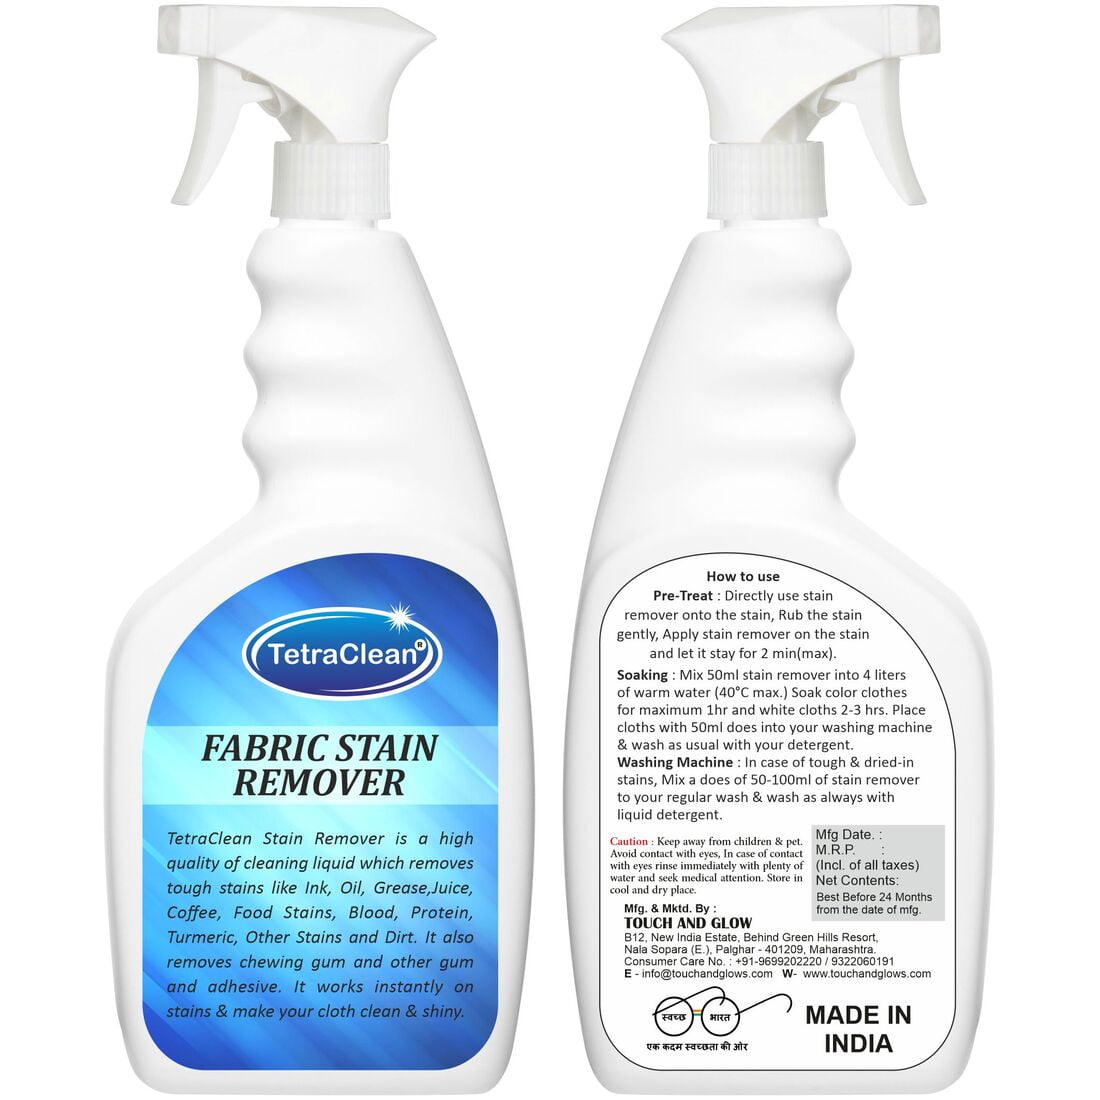 TetraClean Refrigerator Cleaner, Shiner and Stain Remover (500ml)